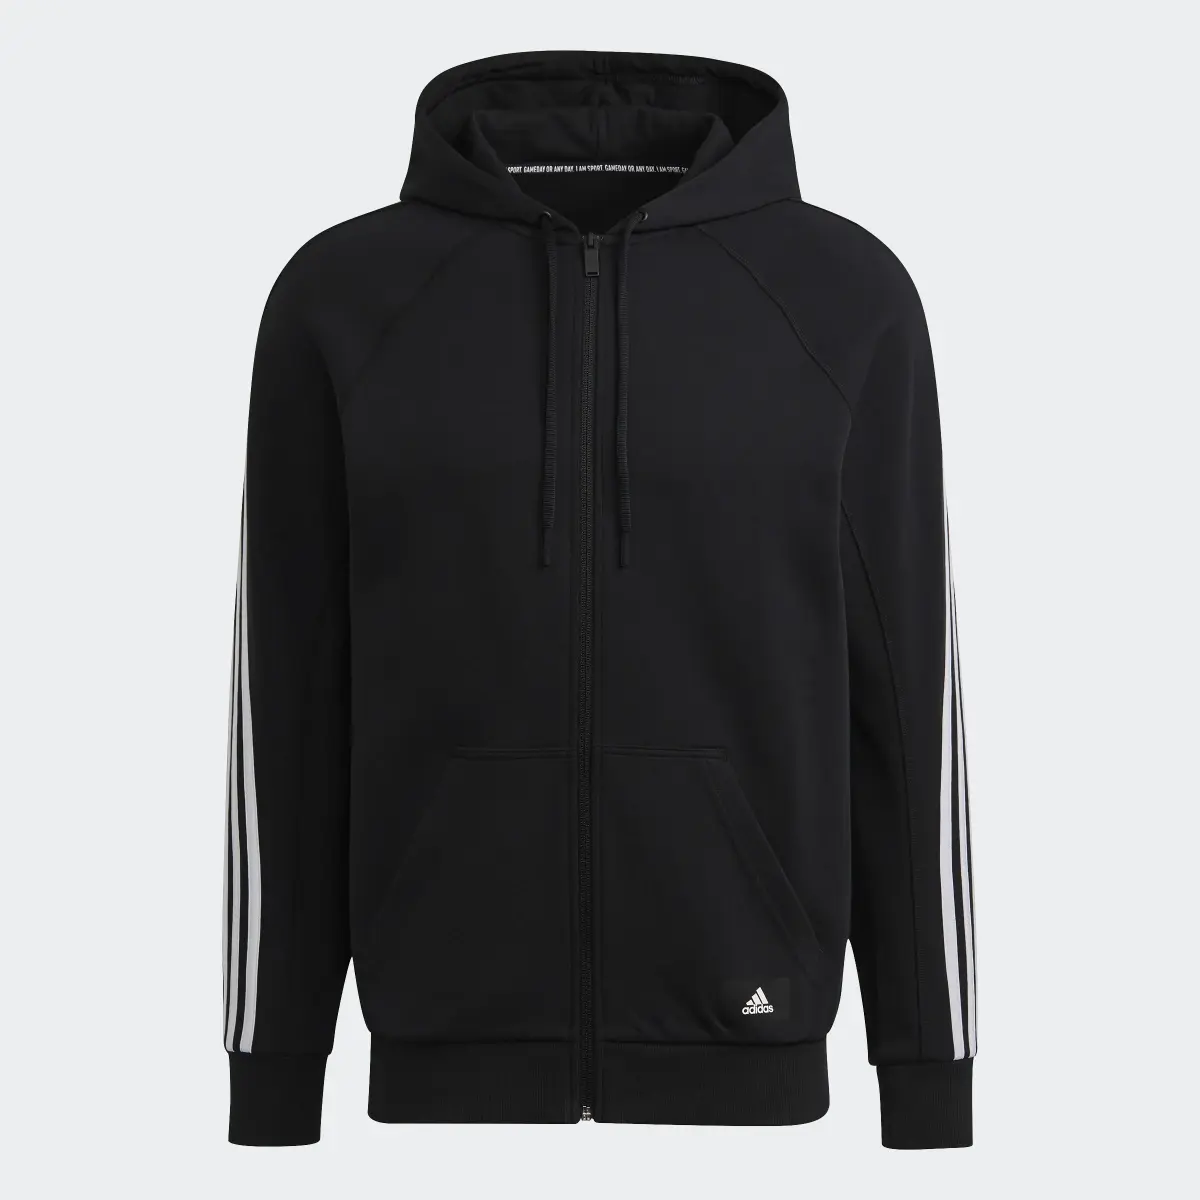 Adidas 3-Stripes Hooded Track Top. 1